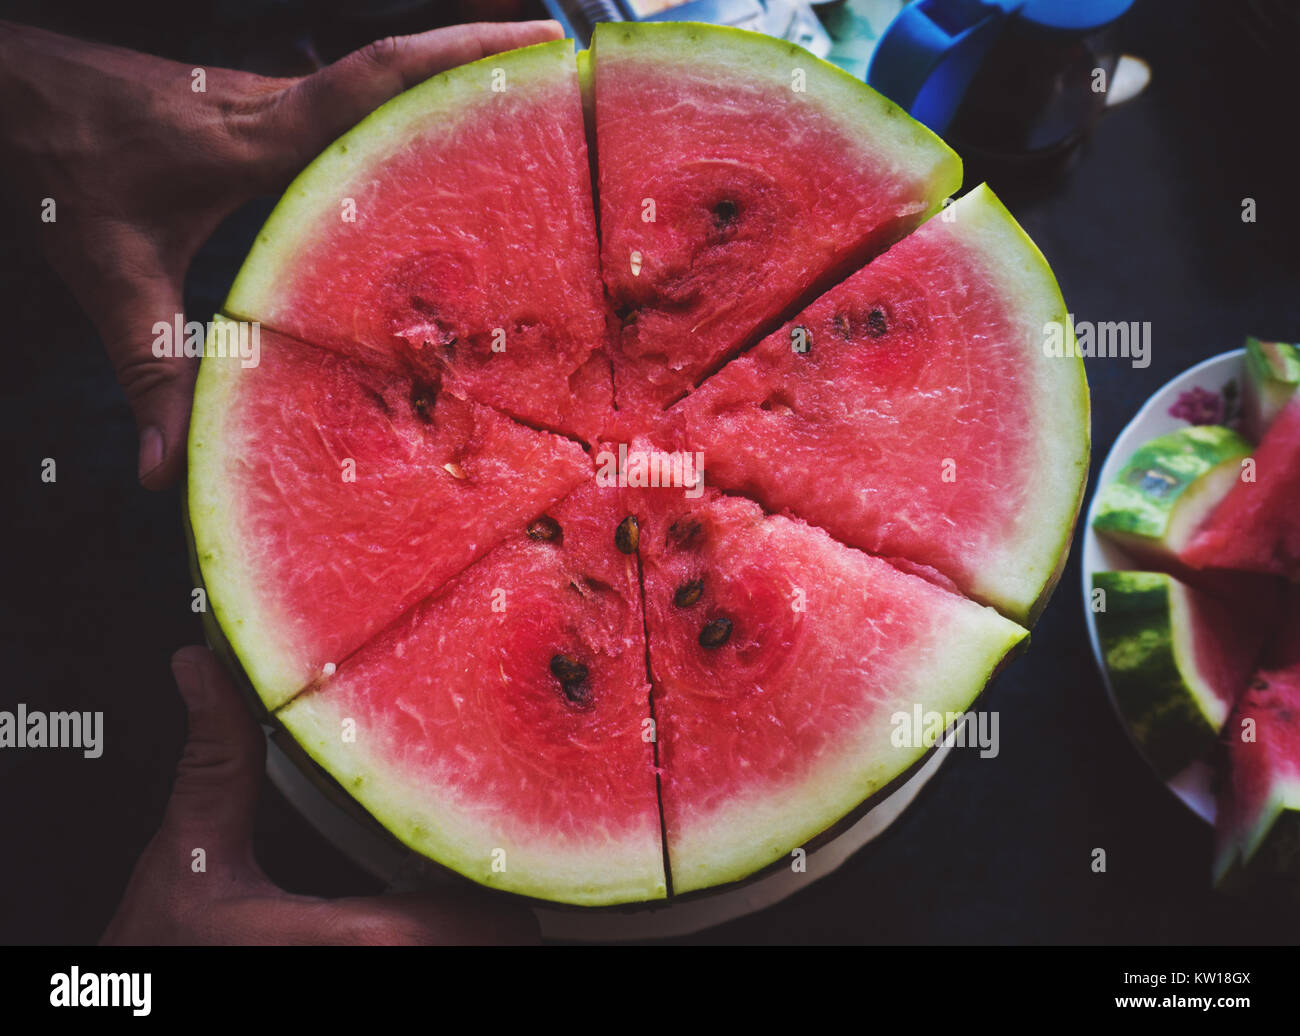 Man cuts red juicy ripe watermelon in slices with knife on dark background slowmotion. Slices of watermelon closeup Stock Photo